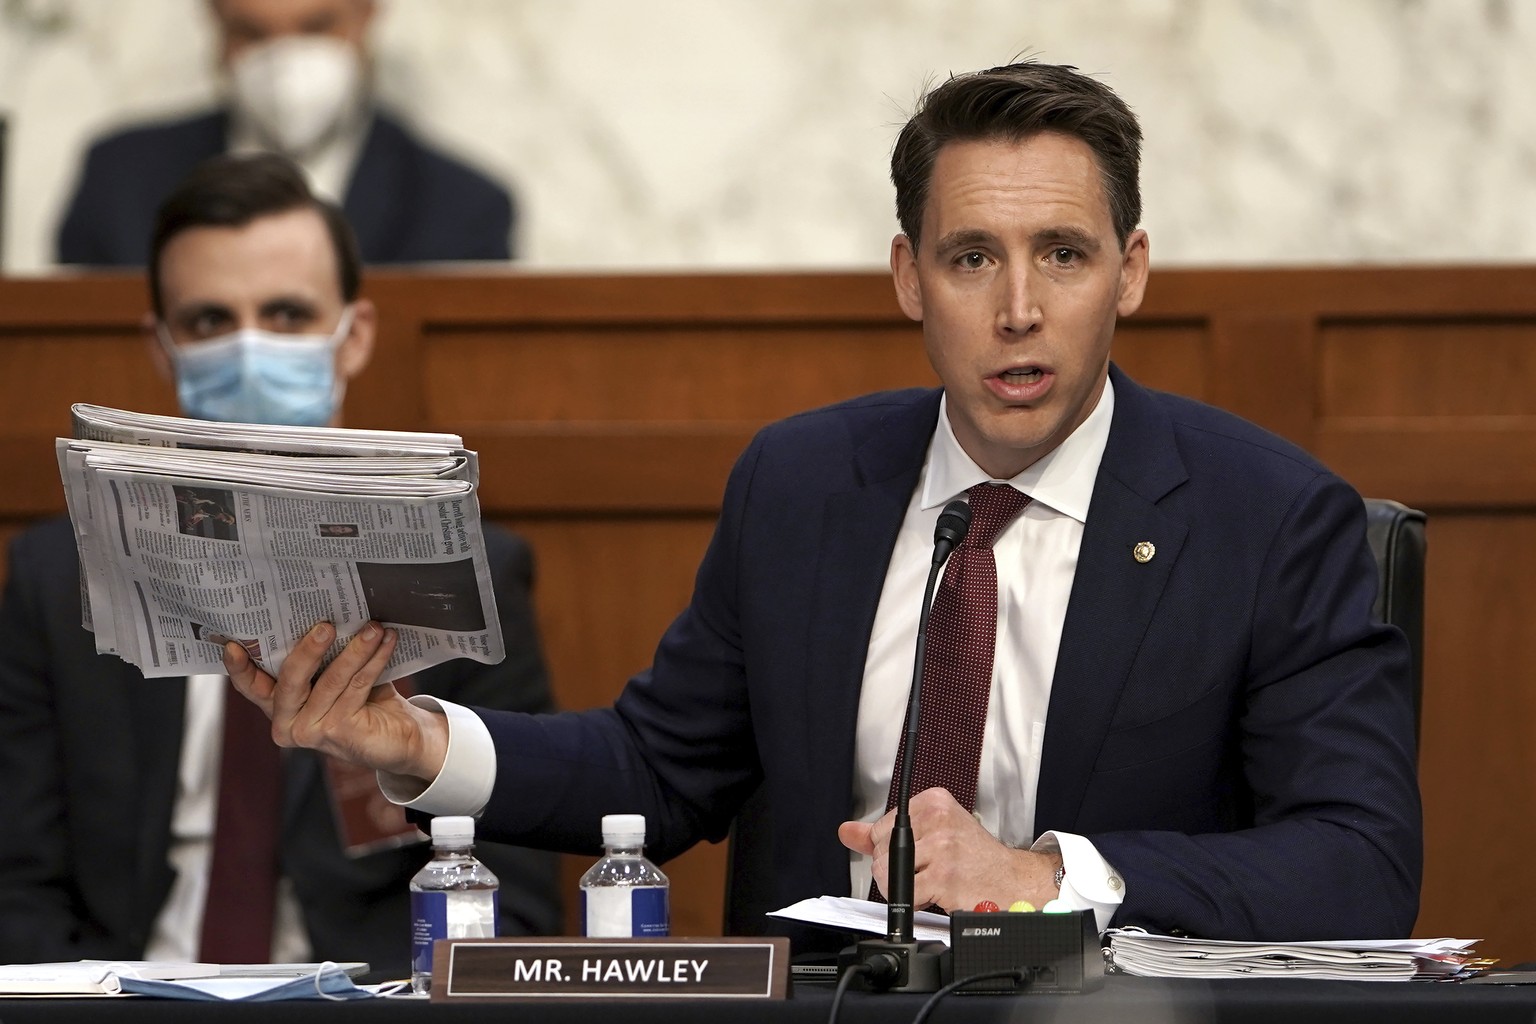 Sen. Josh Hawley, R-Mo., speaks during the confirmation hearing for Supreme Court nominee Amy Coney Barrett at the Senate Judiciary Committee on Capitol Hill in Washington, Monday, Oct. 12, 2020. (Gre ...